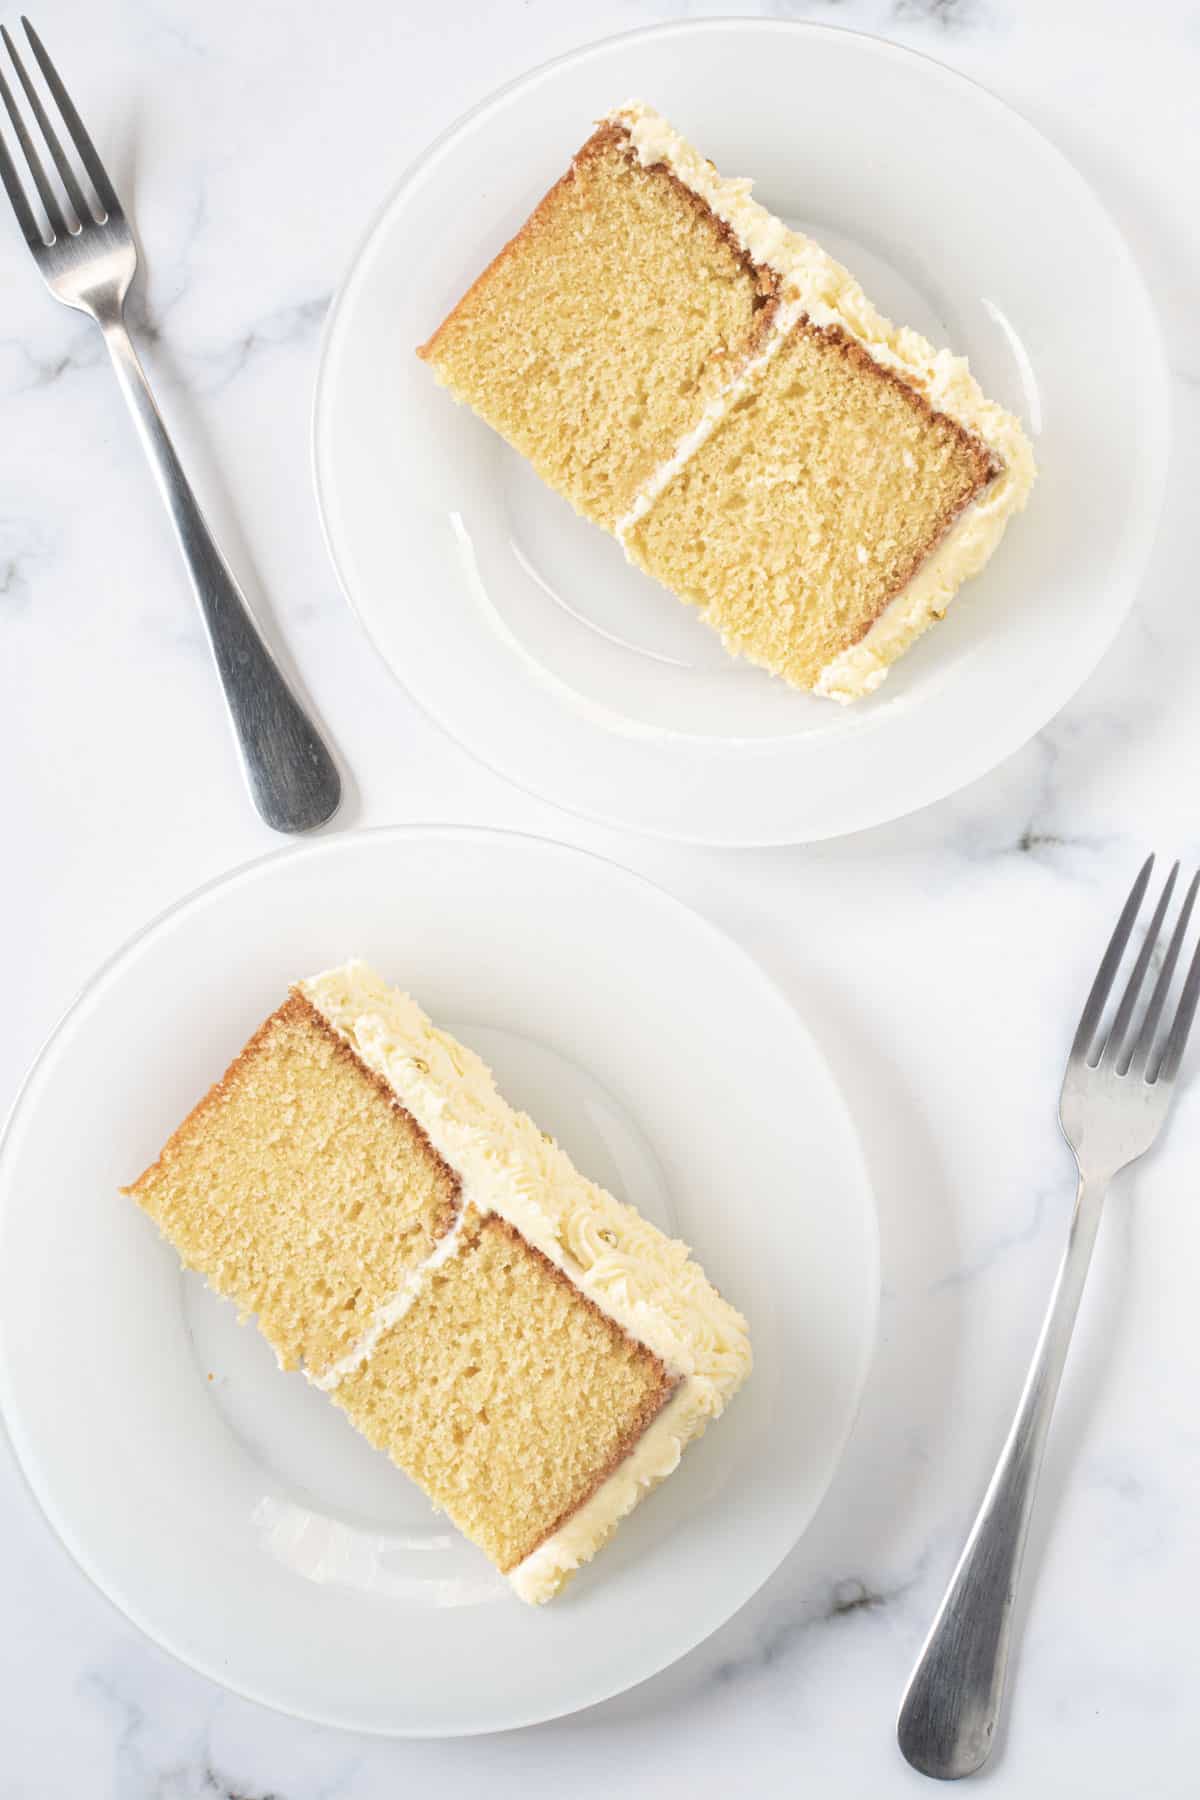 Two slices of white cake on a white plates. Cakes consist of 2 layers sandwiched and covered in buttercream.